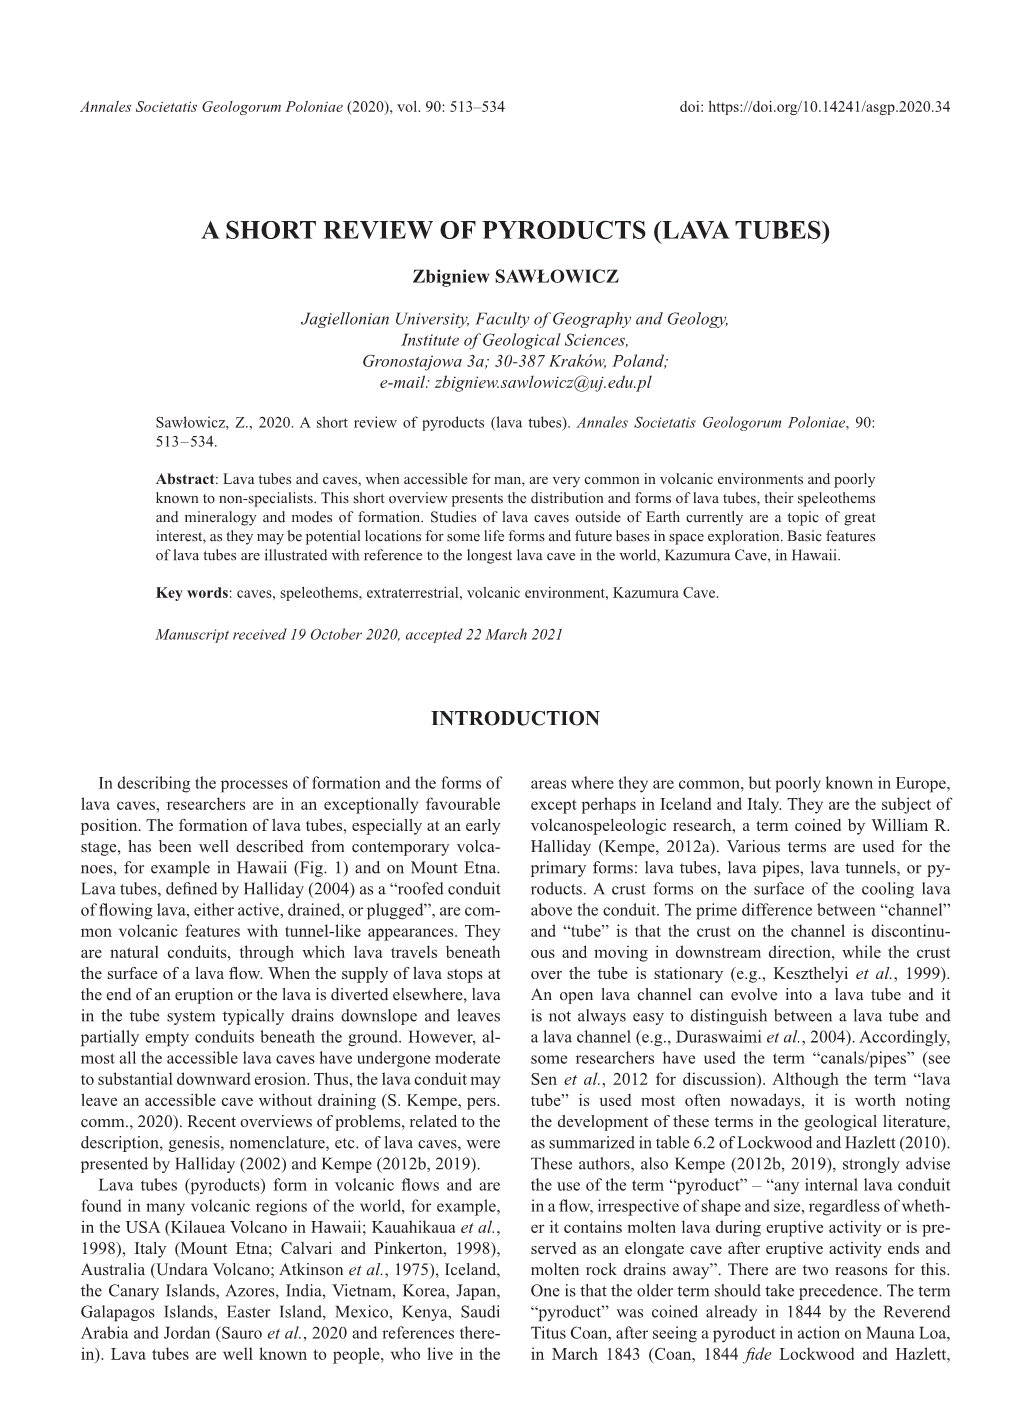 A Short Review of Pyroducts (Lava Tubes)